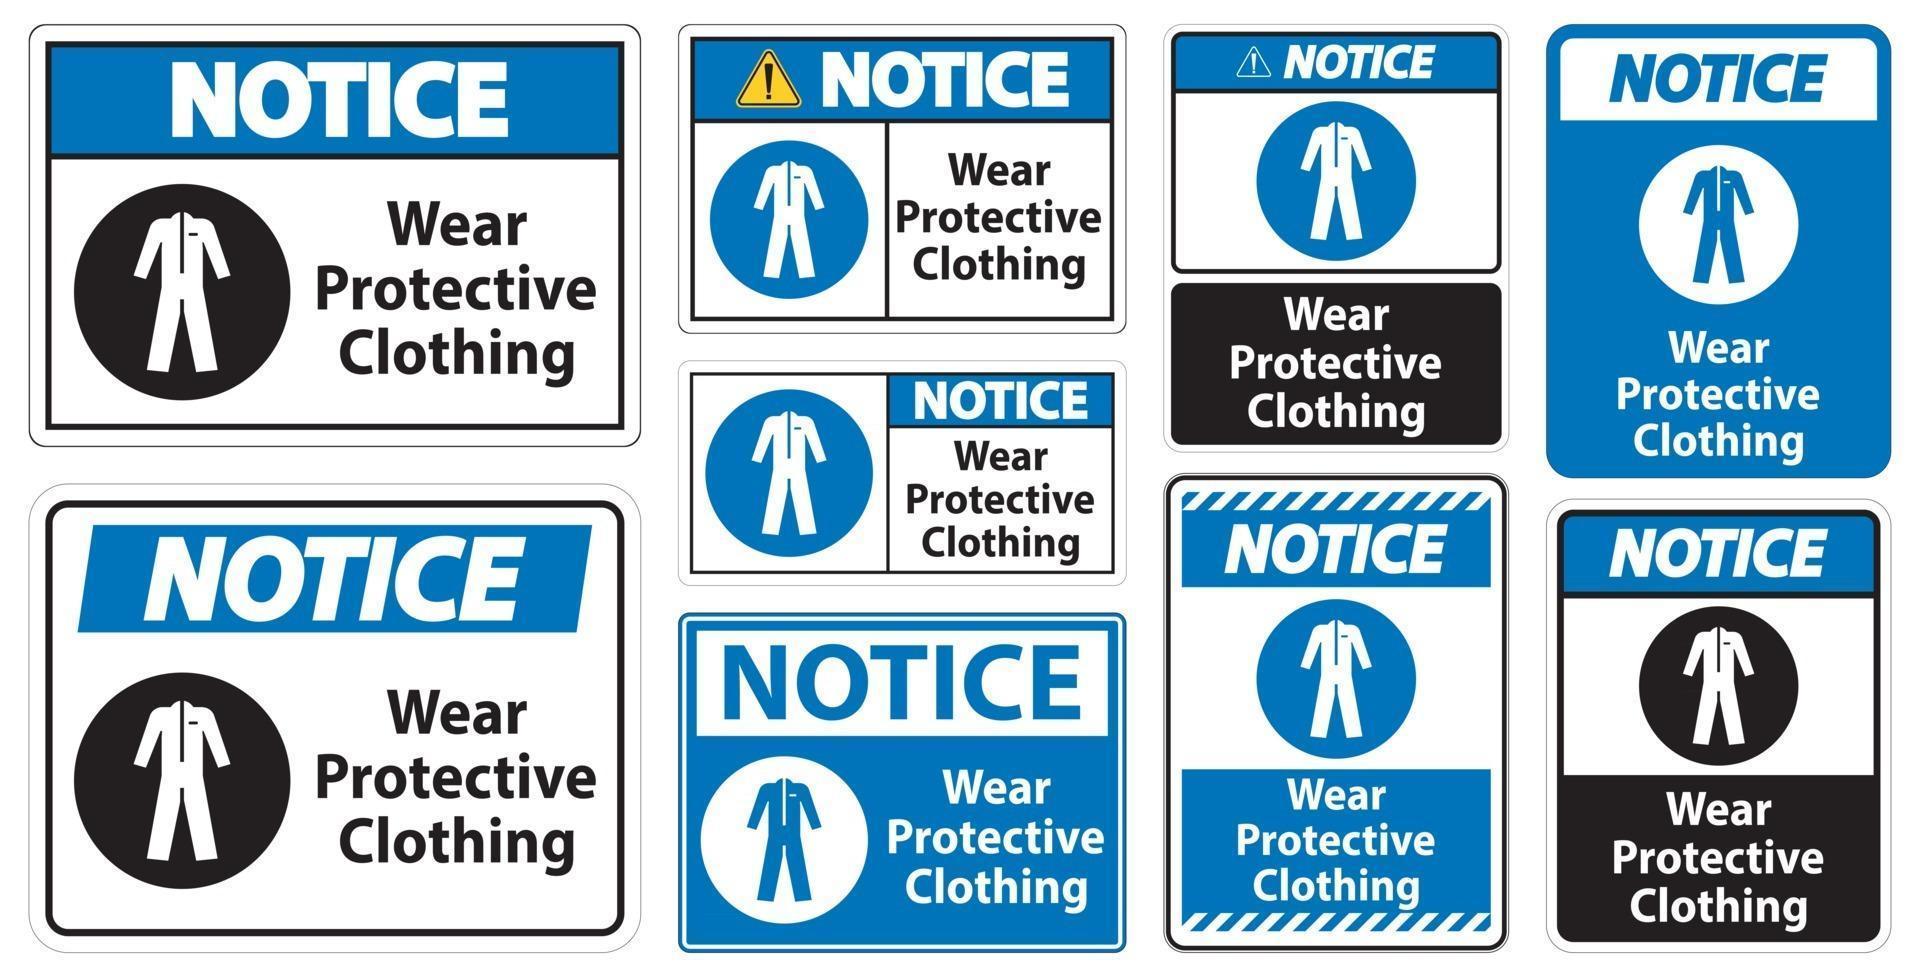 Notice Wear protective clothing sign on white background vector